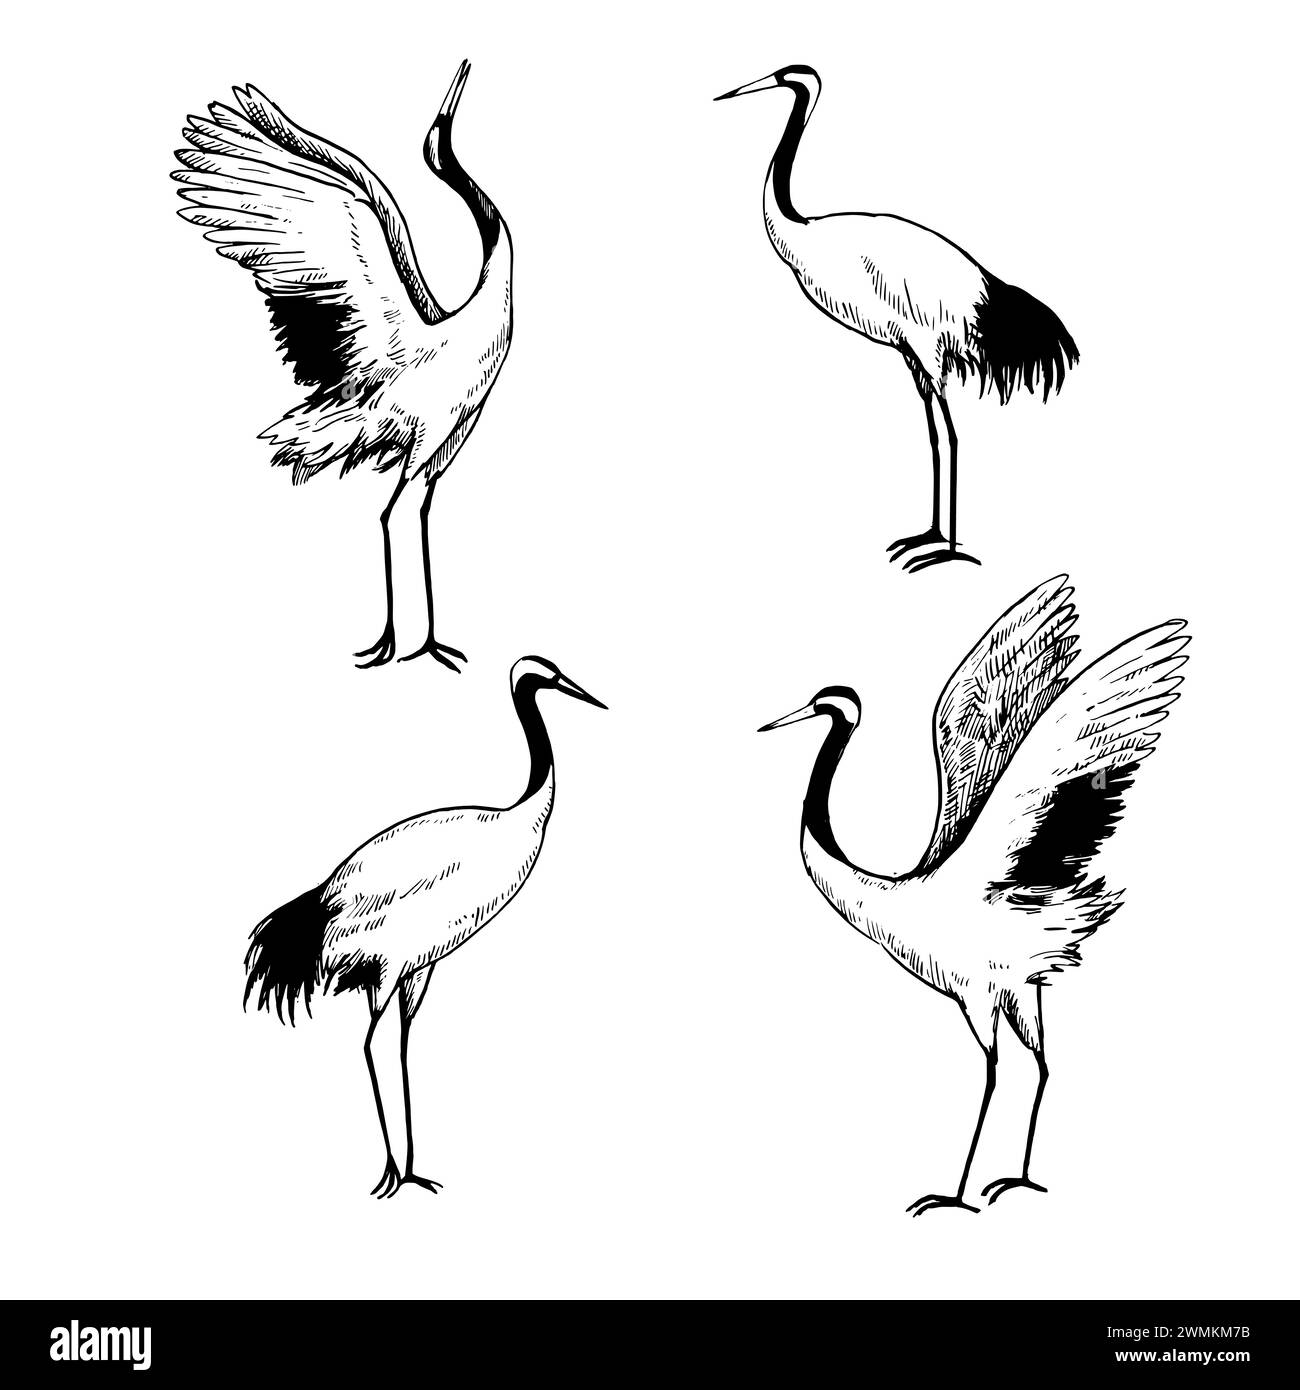 Japanese cranes black and white vector illustration. Various positions of birds isolated on white background. Ink drawing. Stock Vector